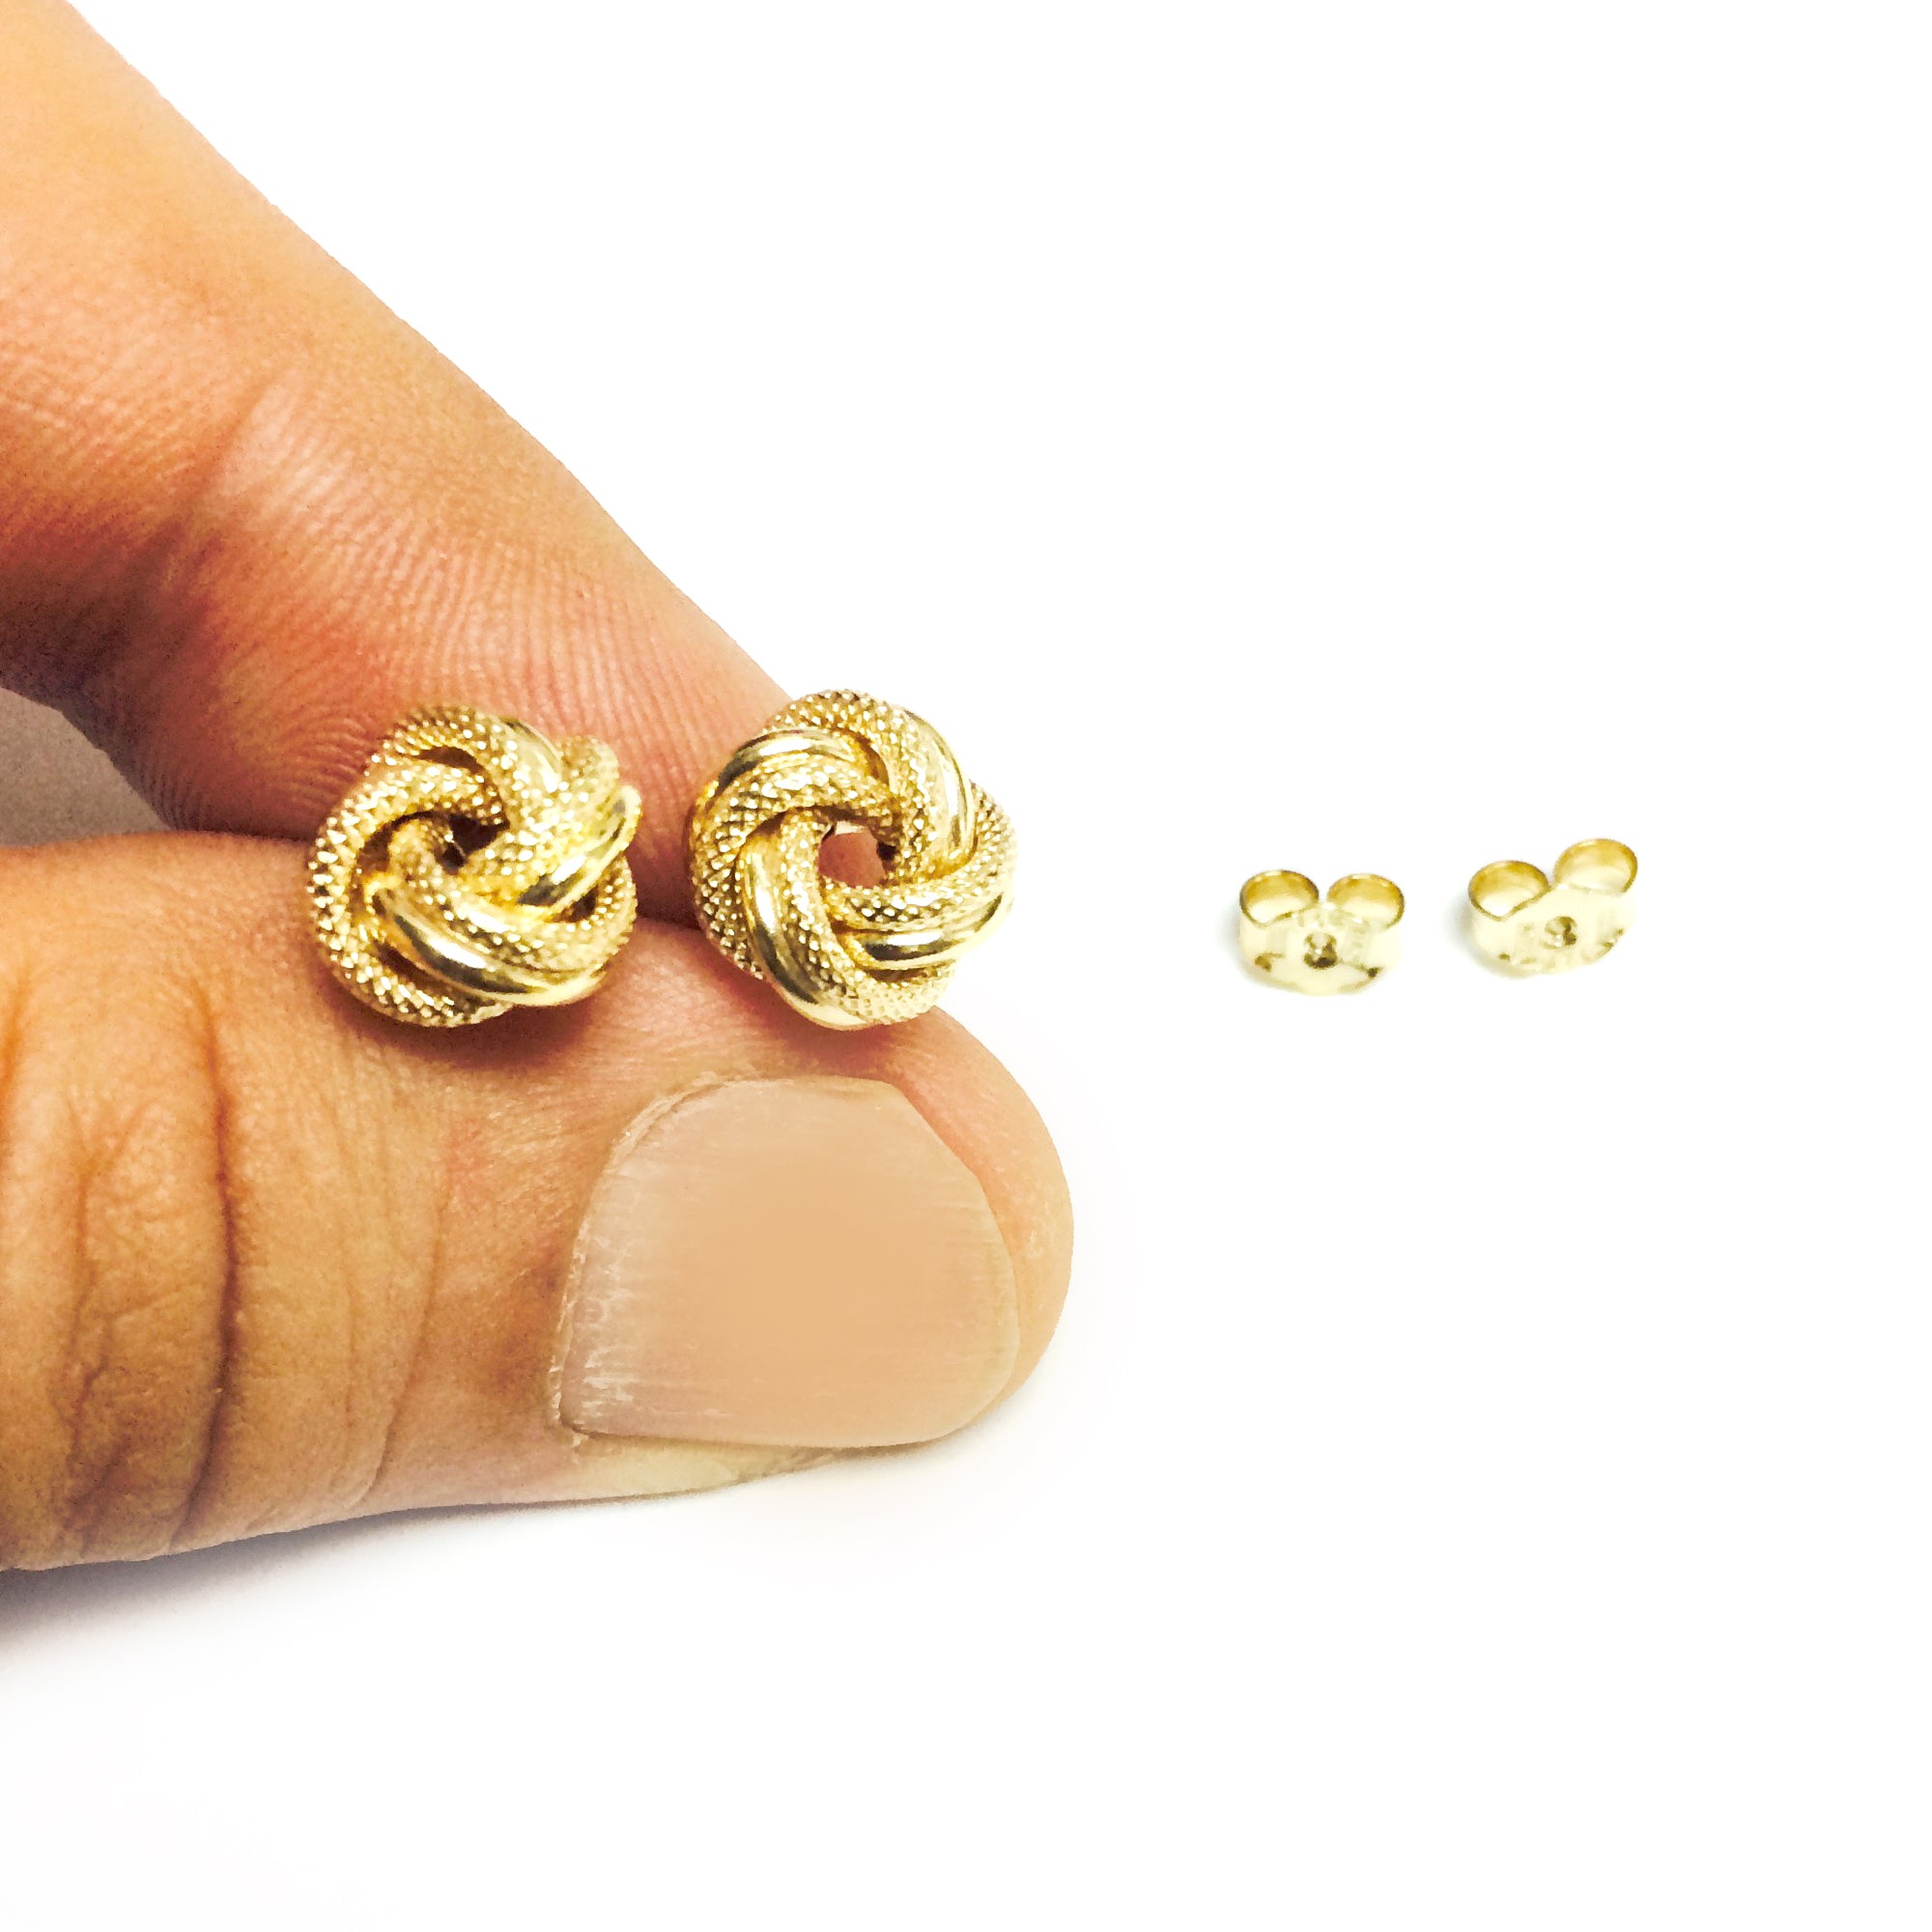 14k Yellow Gold Shiny And Textured Double Row Love Knot Stud Earrings, 10mm